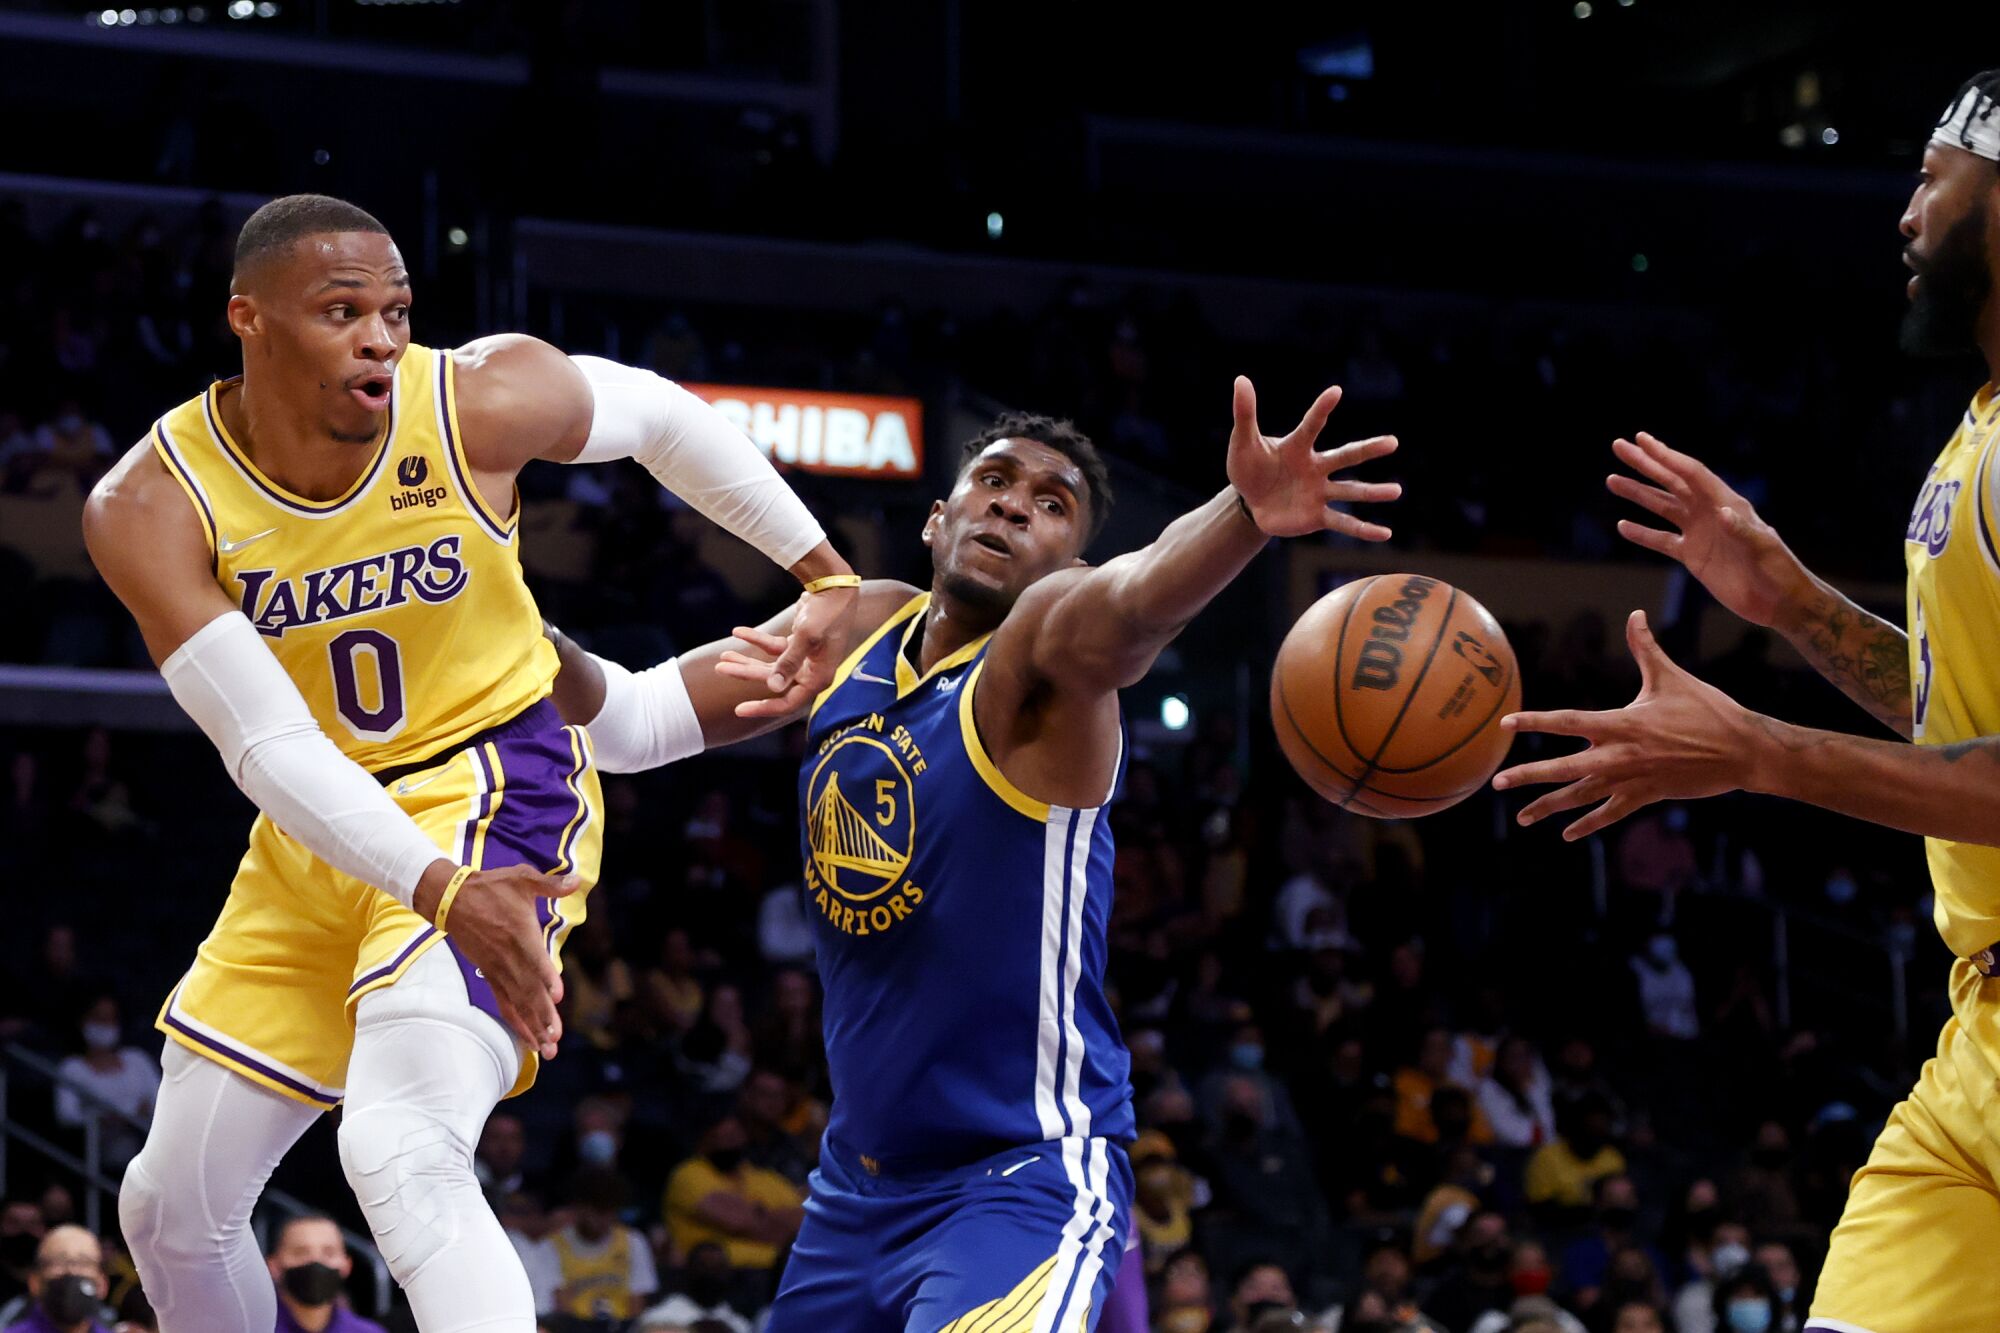 Lakers guard Russell Westbrook passes around Warriors center Kevon Looney to teammate Anthony Davis.